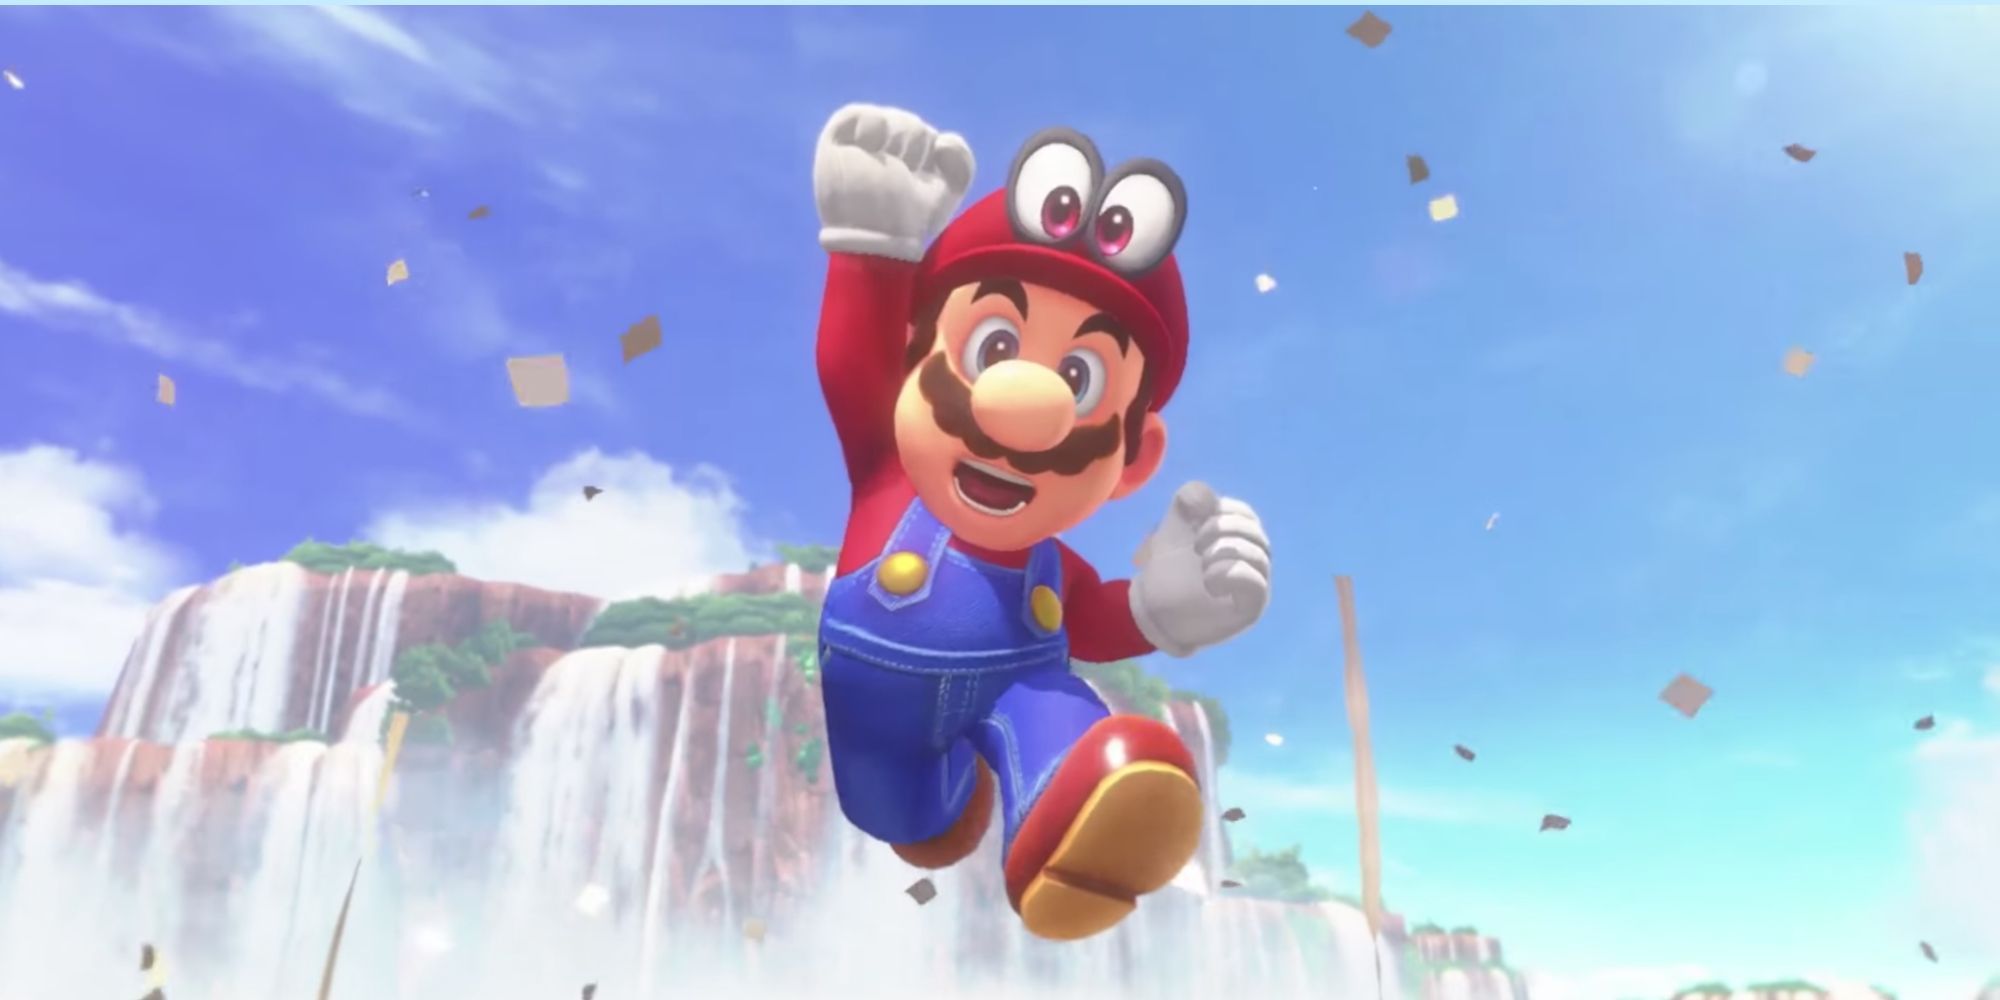 Super Mario Odyssey with Mario punching the air and a hill and sky in the background